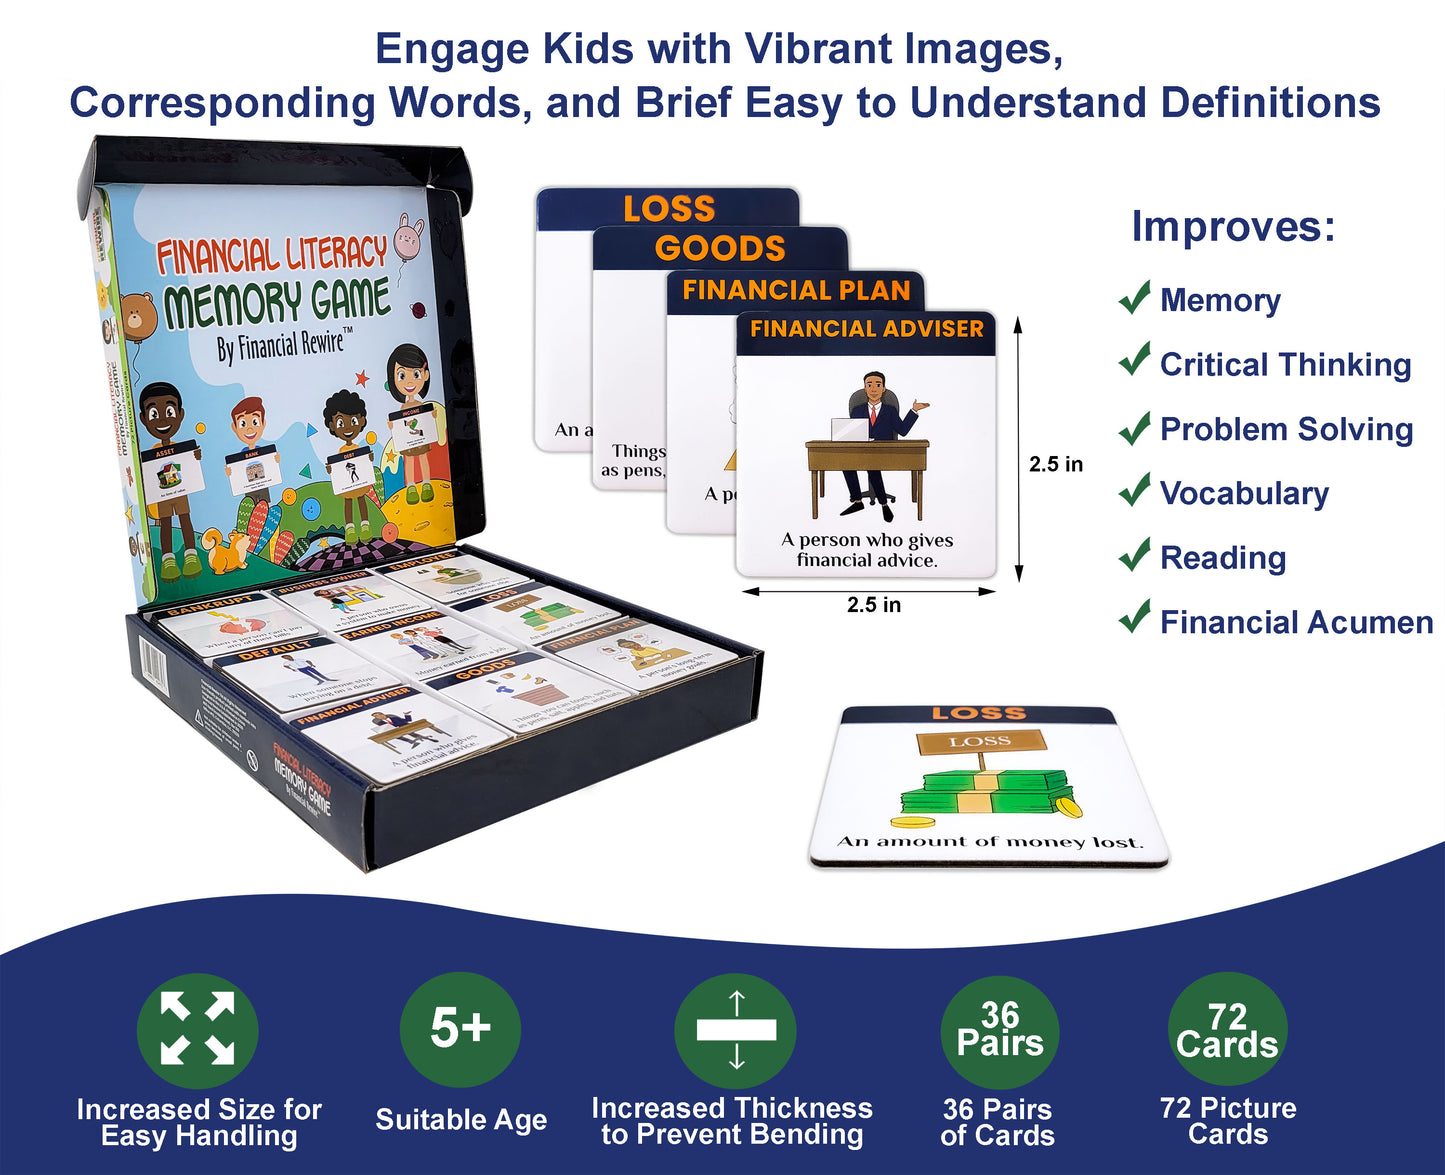 Financial Literacy Educational Set for the Entire Family - All 4 Products!